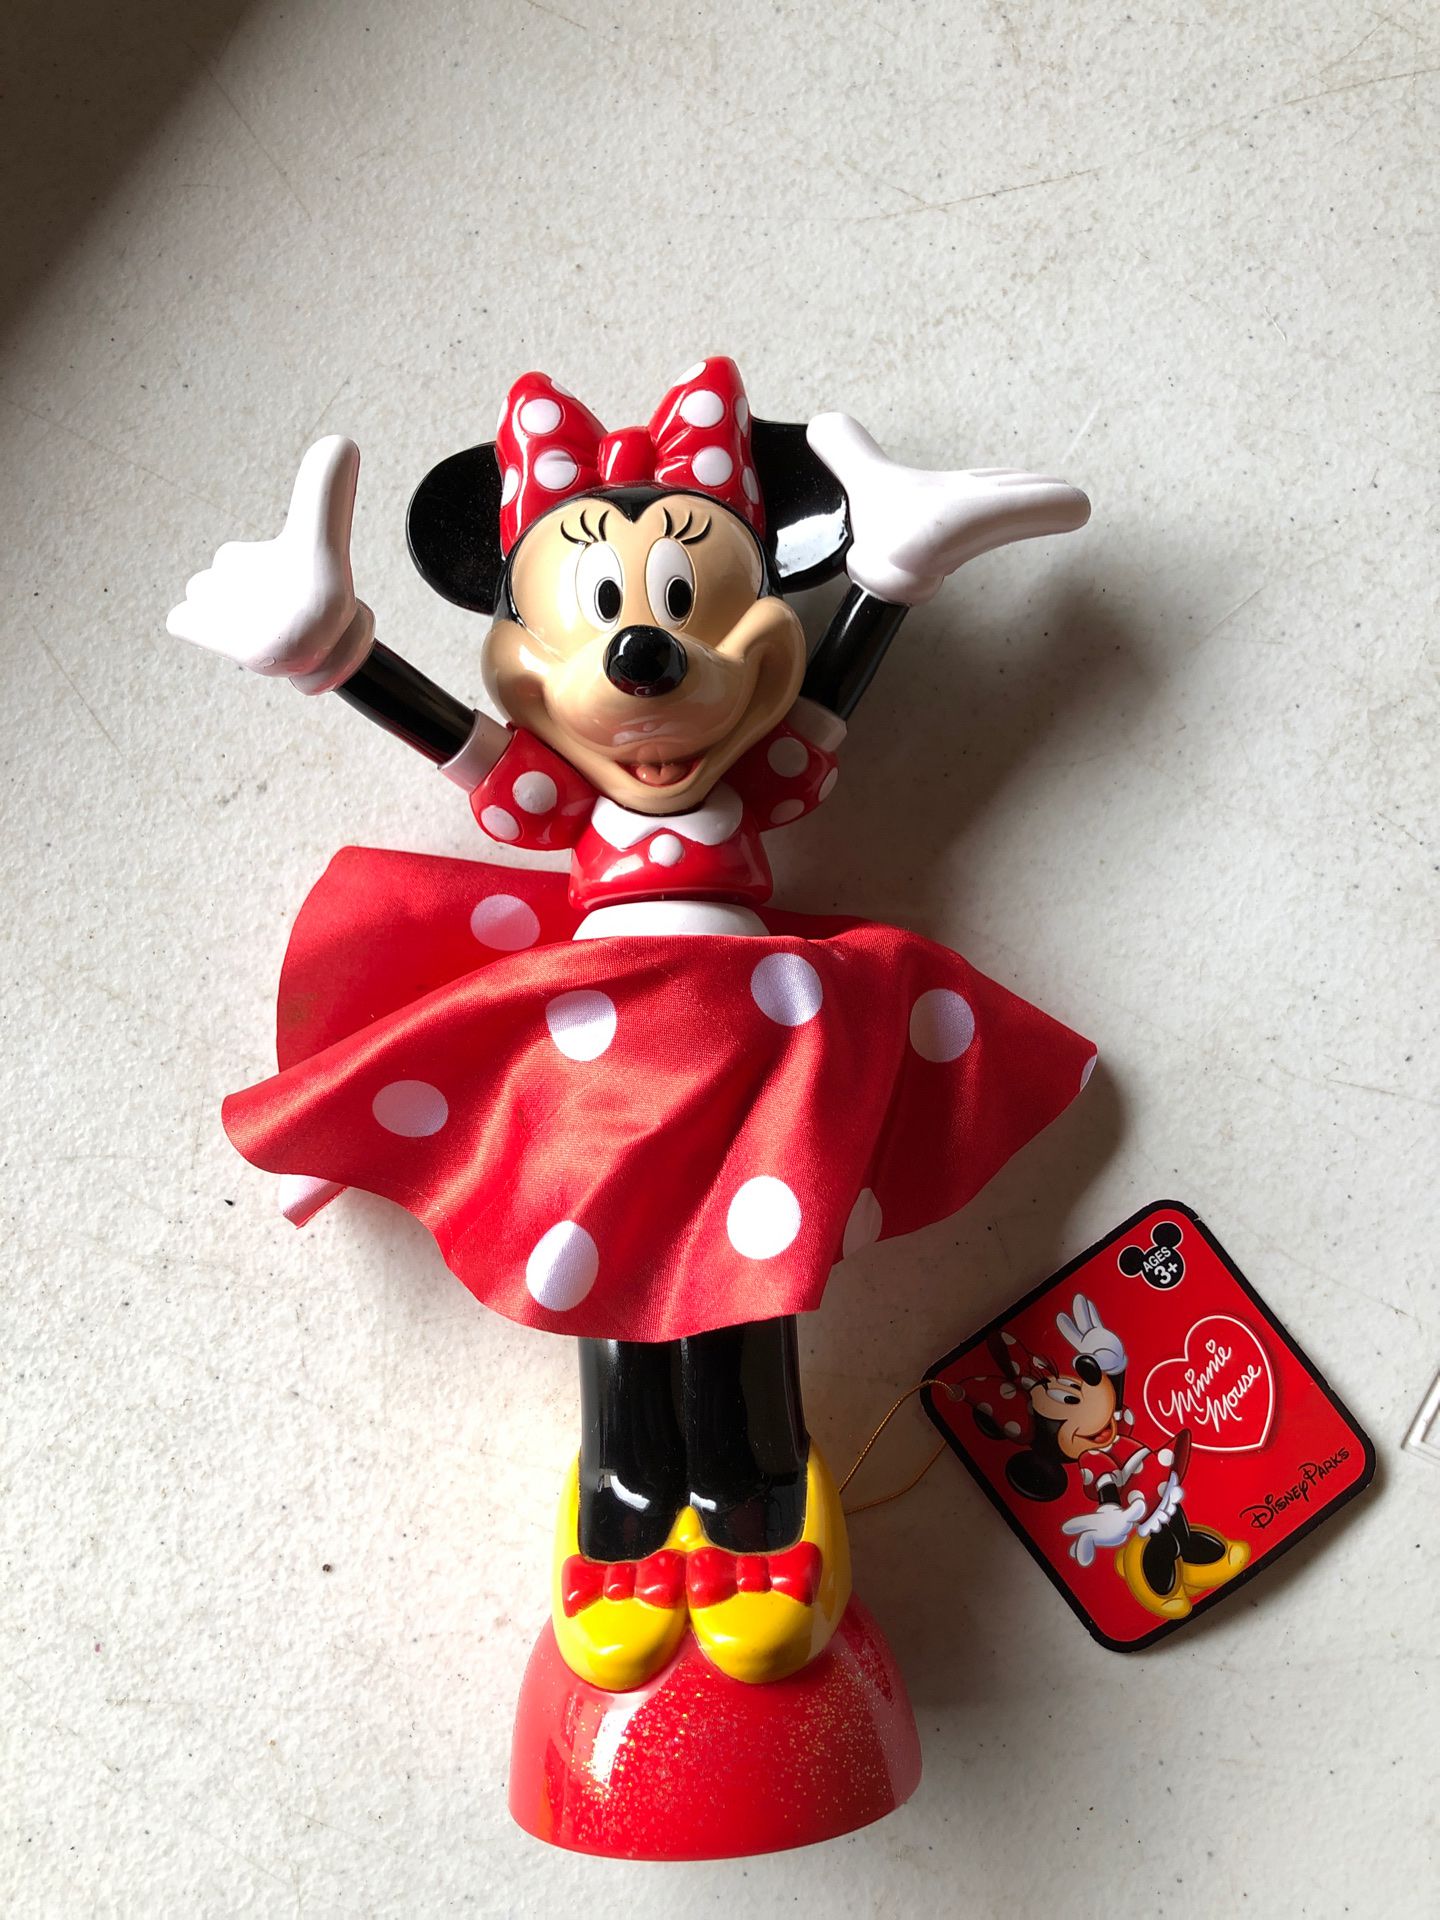 Minnie Mouse spin toy older piece